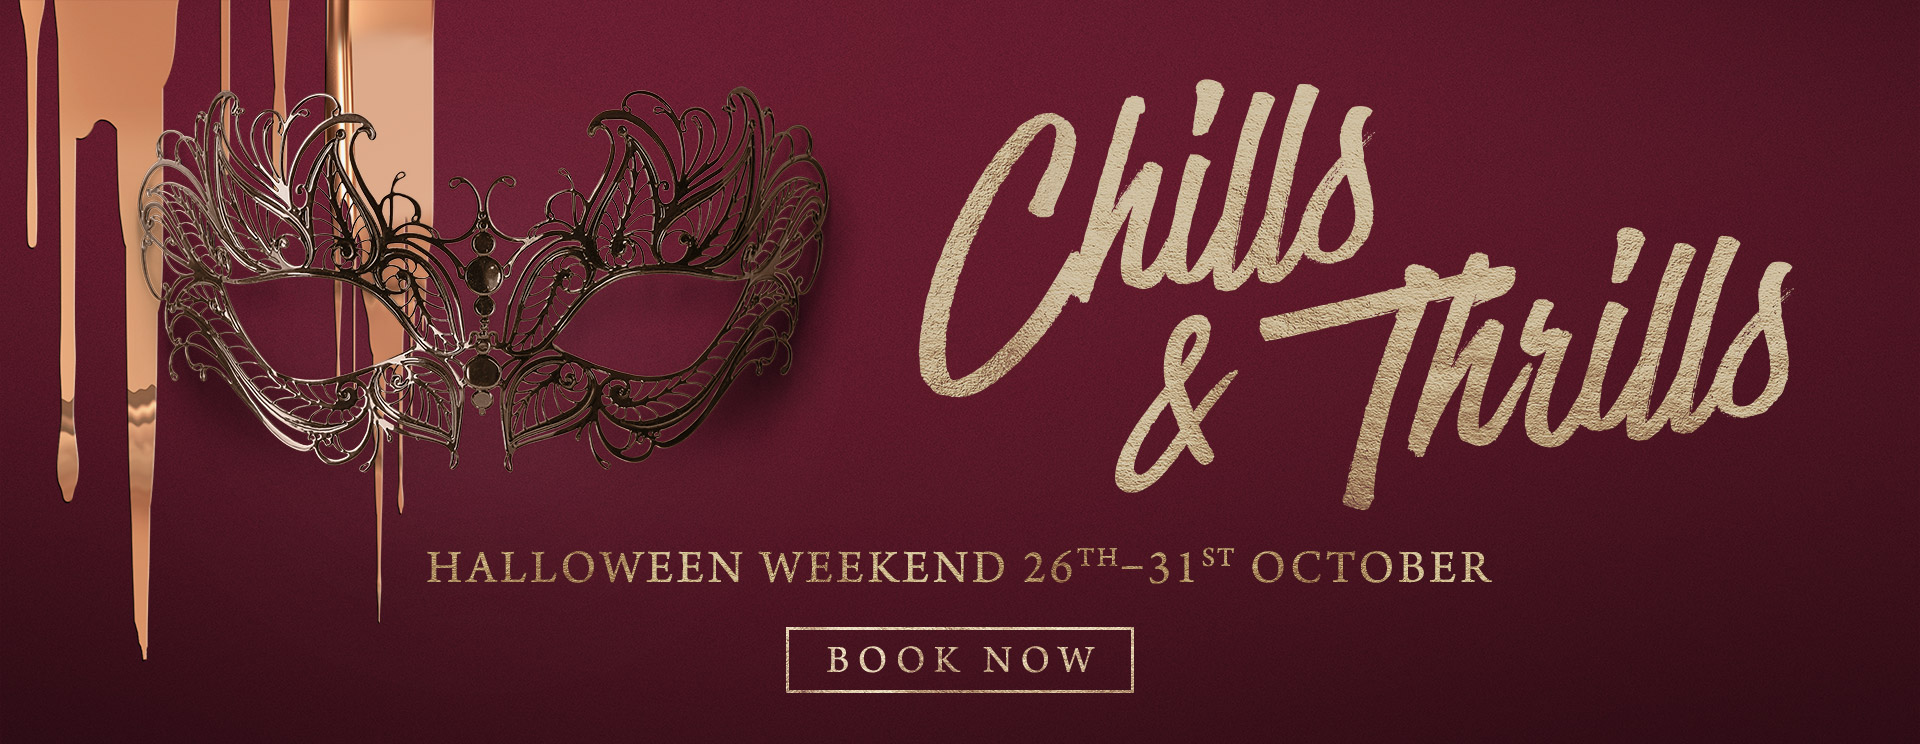 Chills & Thrills this Halloween at One Kew Road